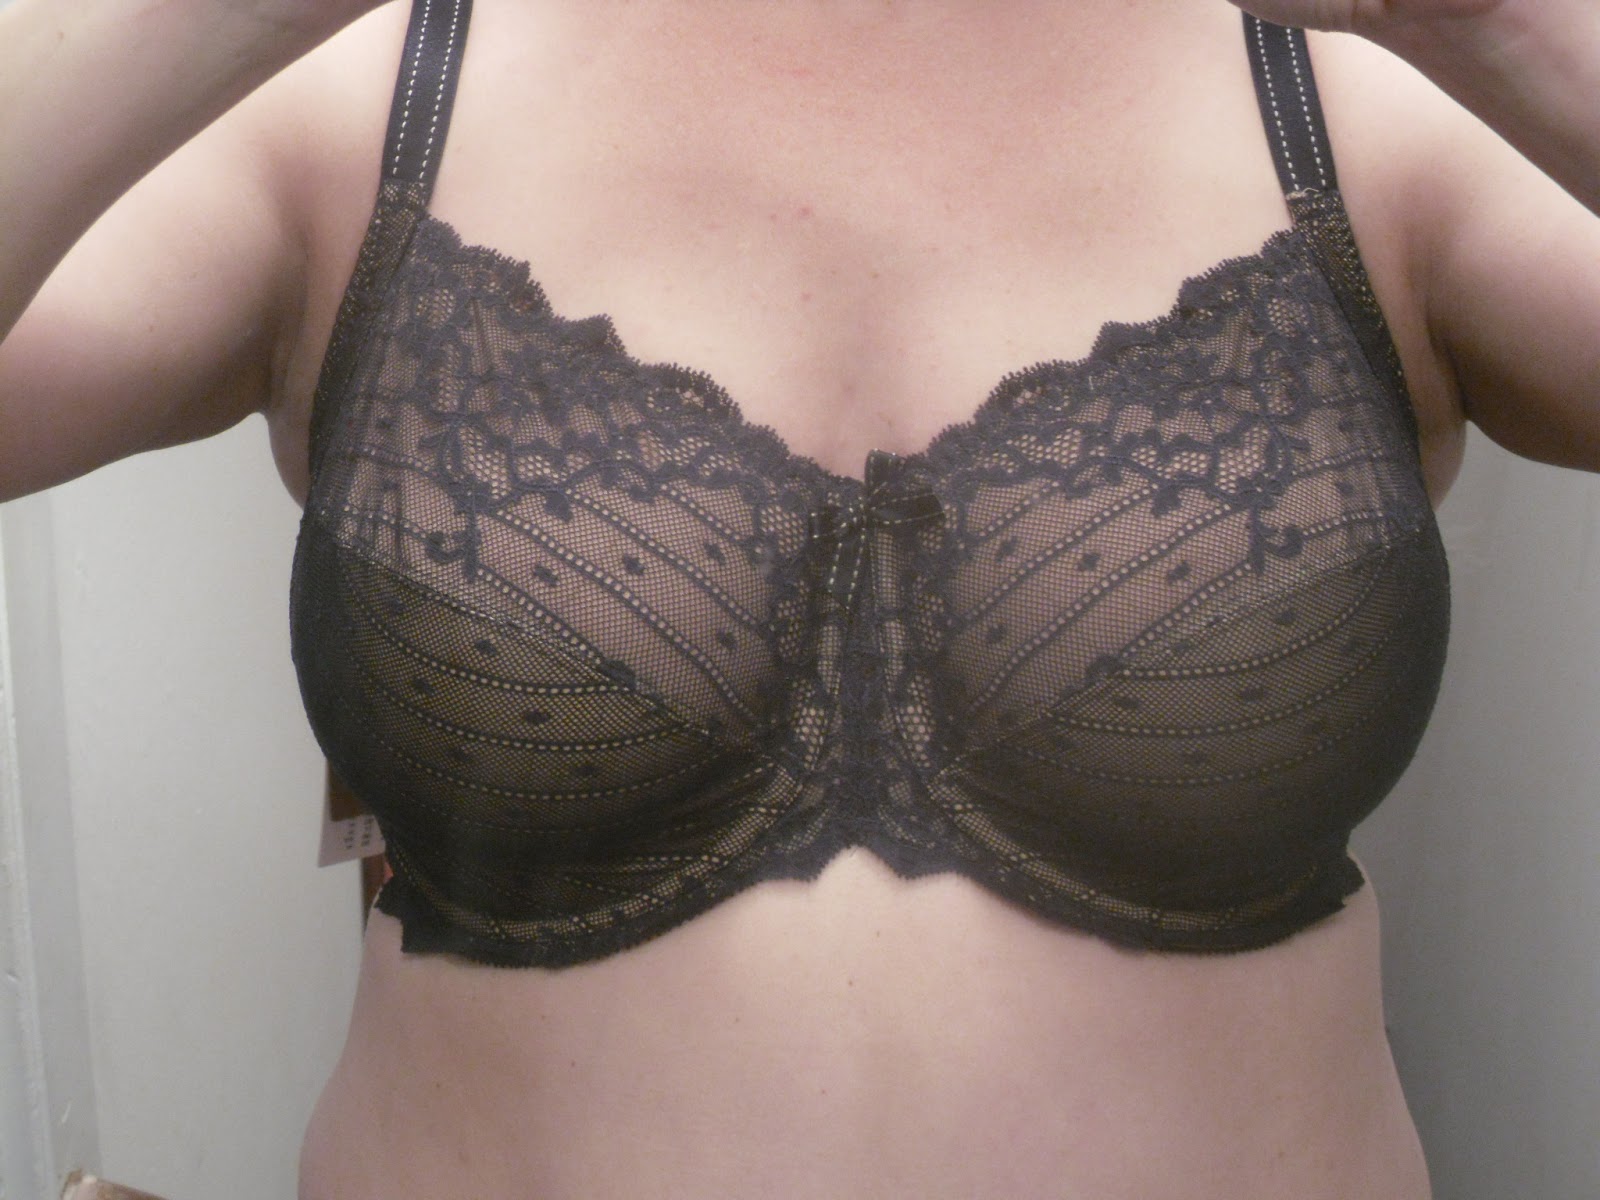 If the Bra Fits: Found My First Bra That Fits!!